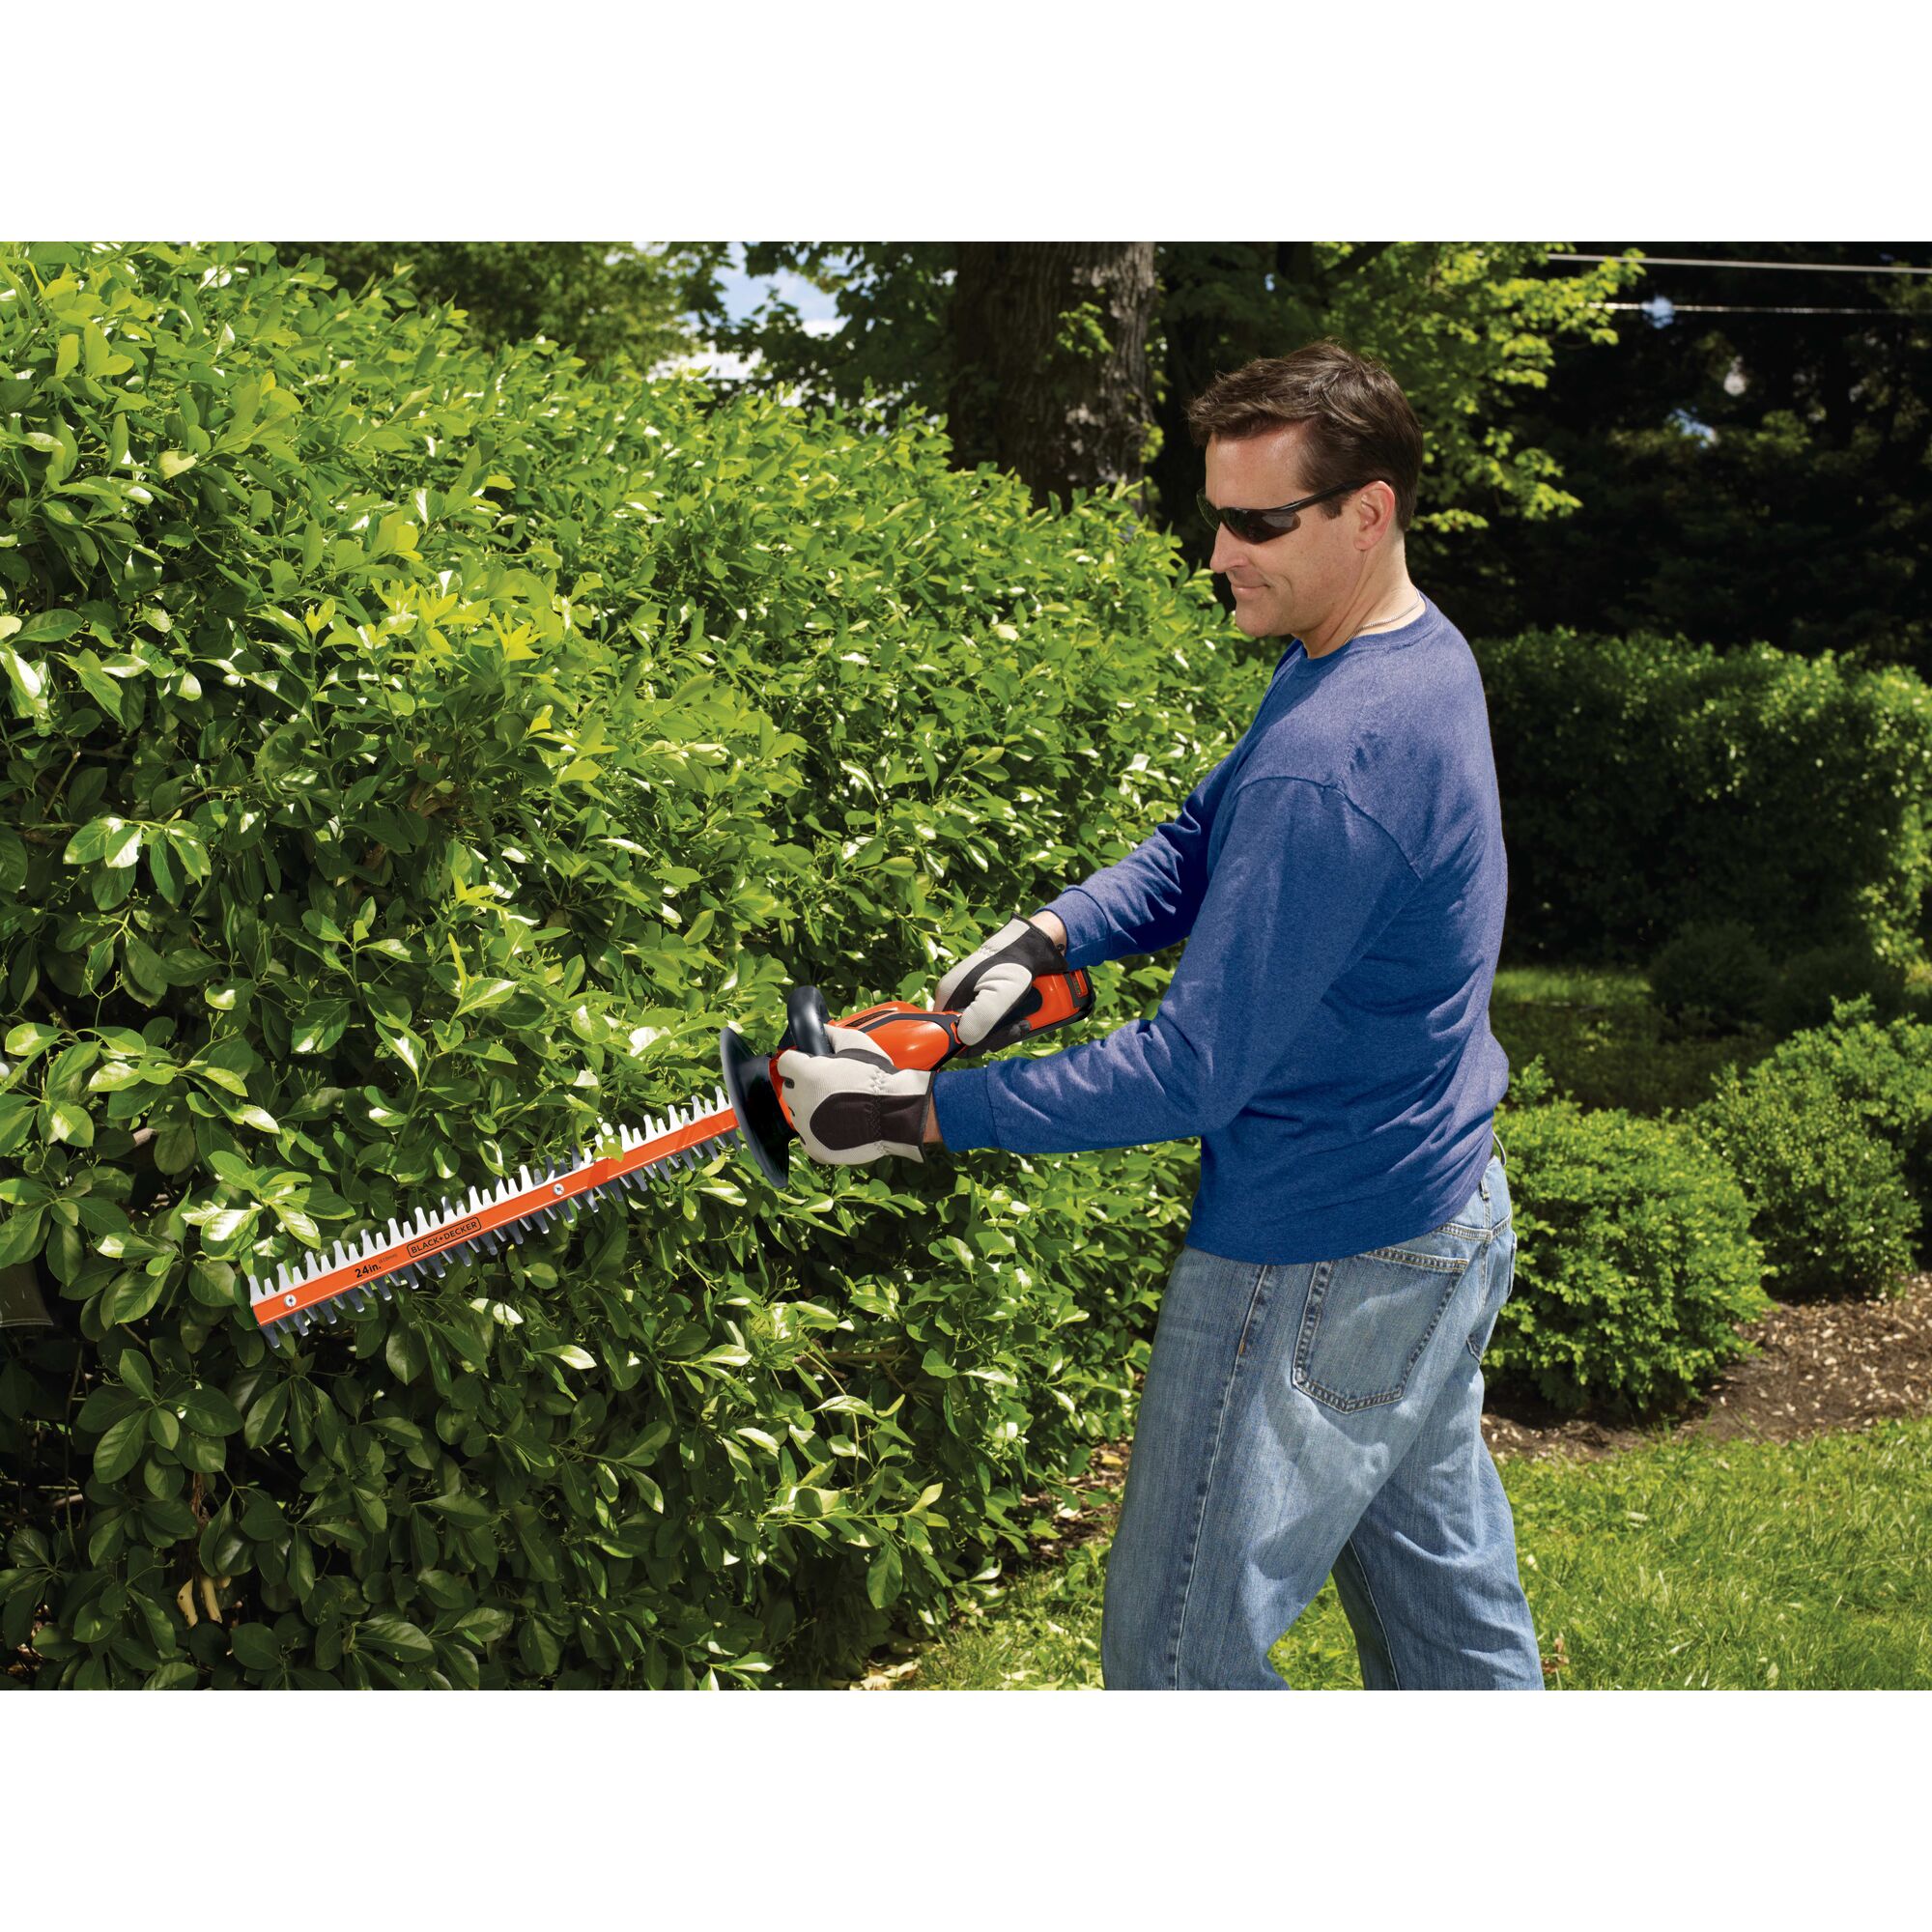 Lithium 24 inch hedge trimmer battery and charger not included being used by a person to trim bushes.